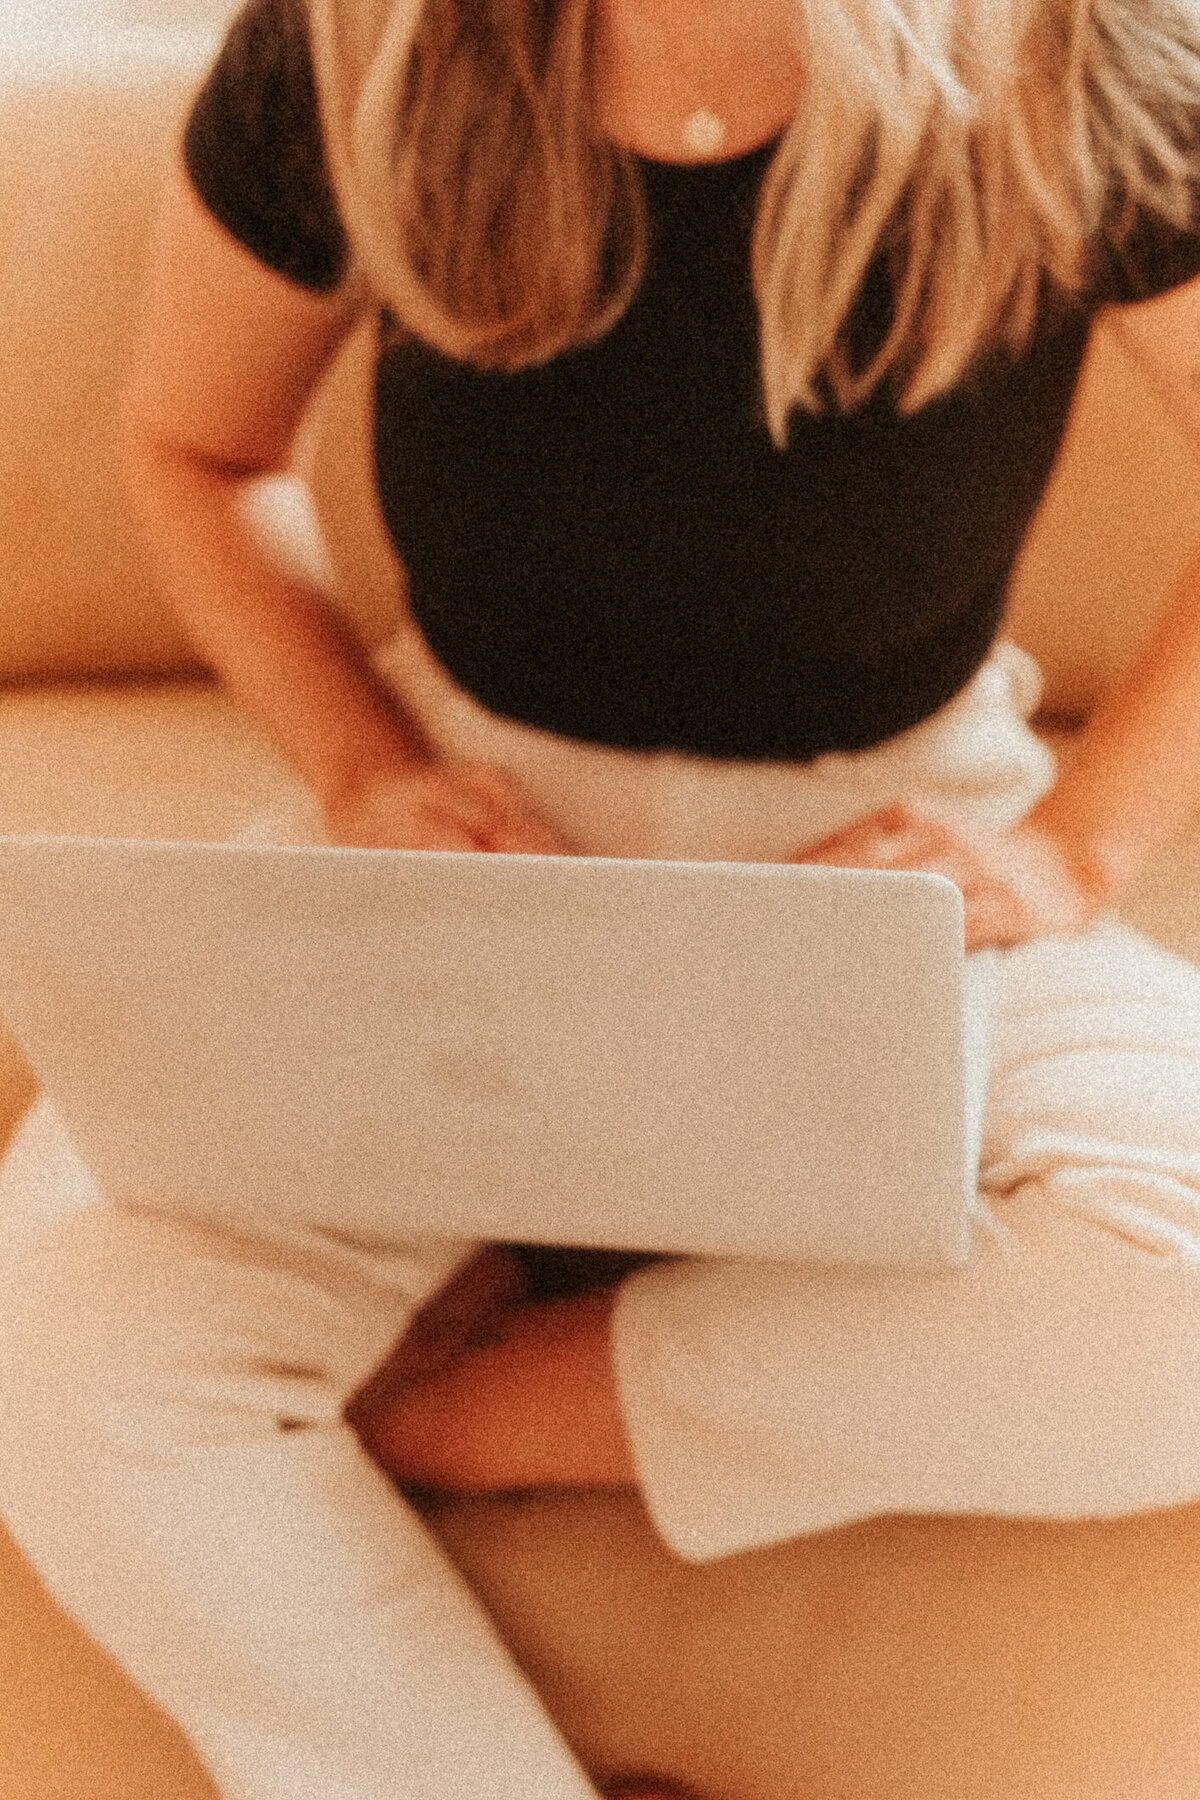 Girl sitting on couch and working on macbook